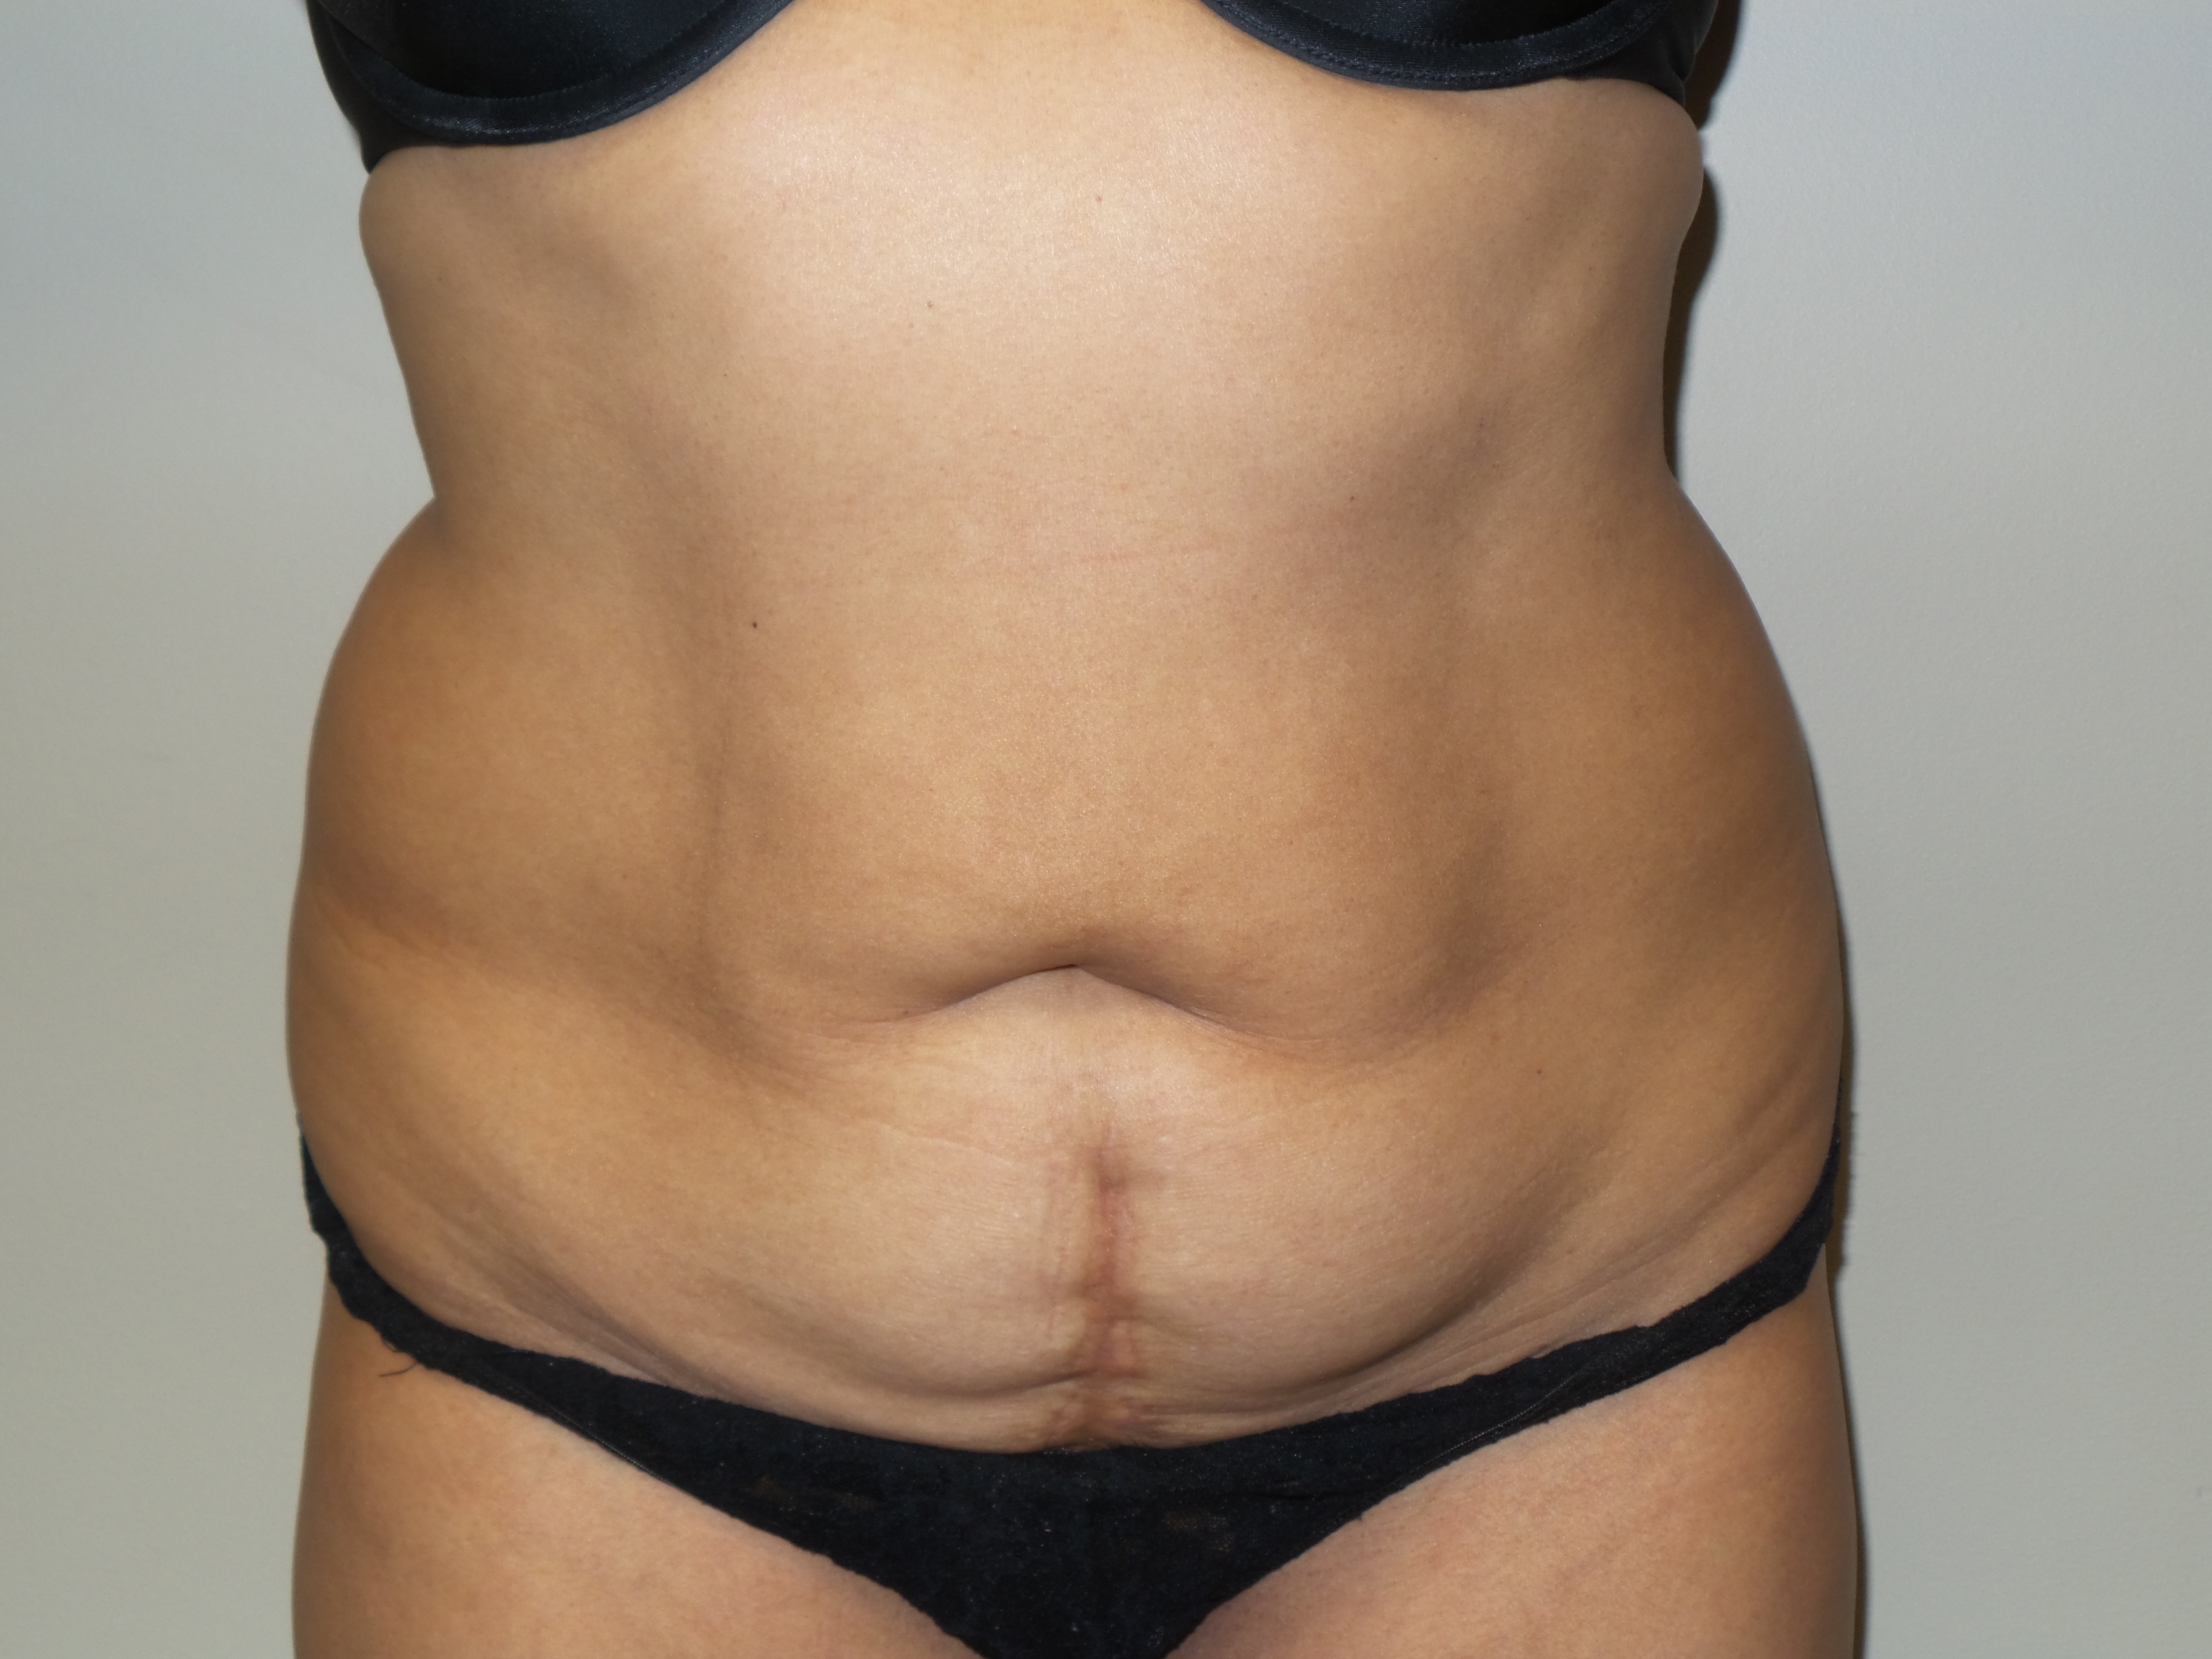 Tummy Tuck Before and After 70 | Sanjay Grover MD FACS